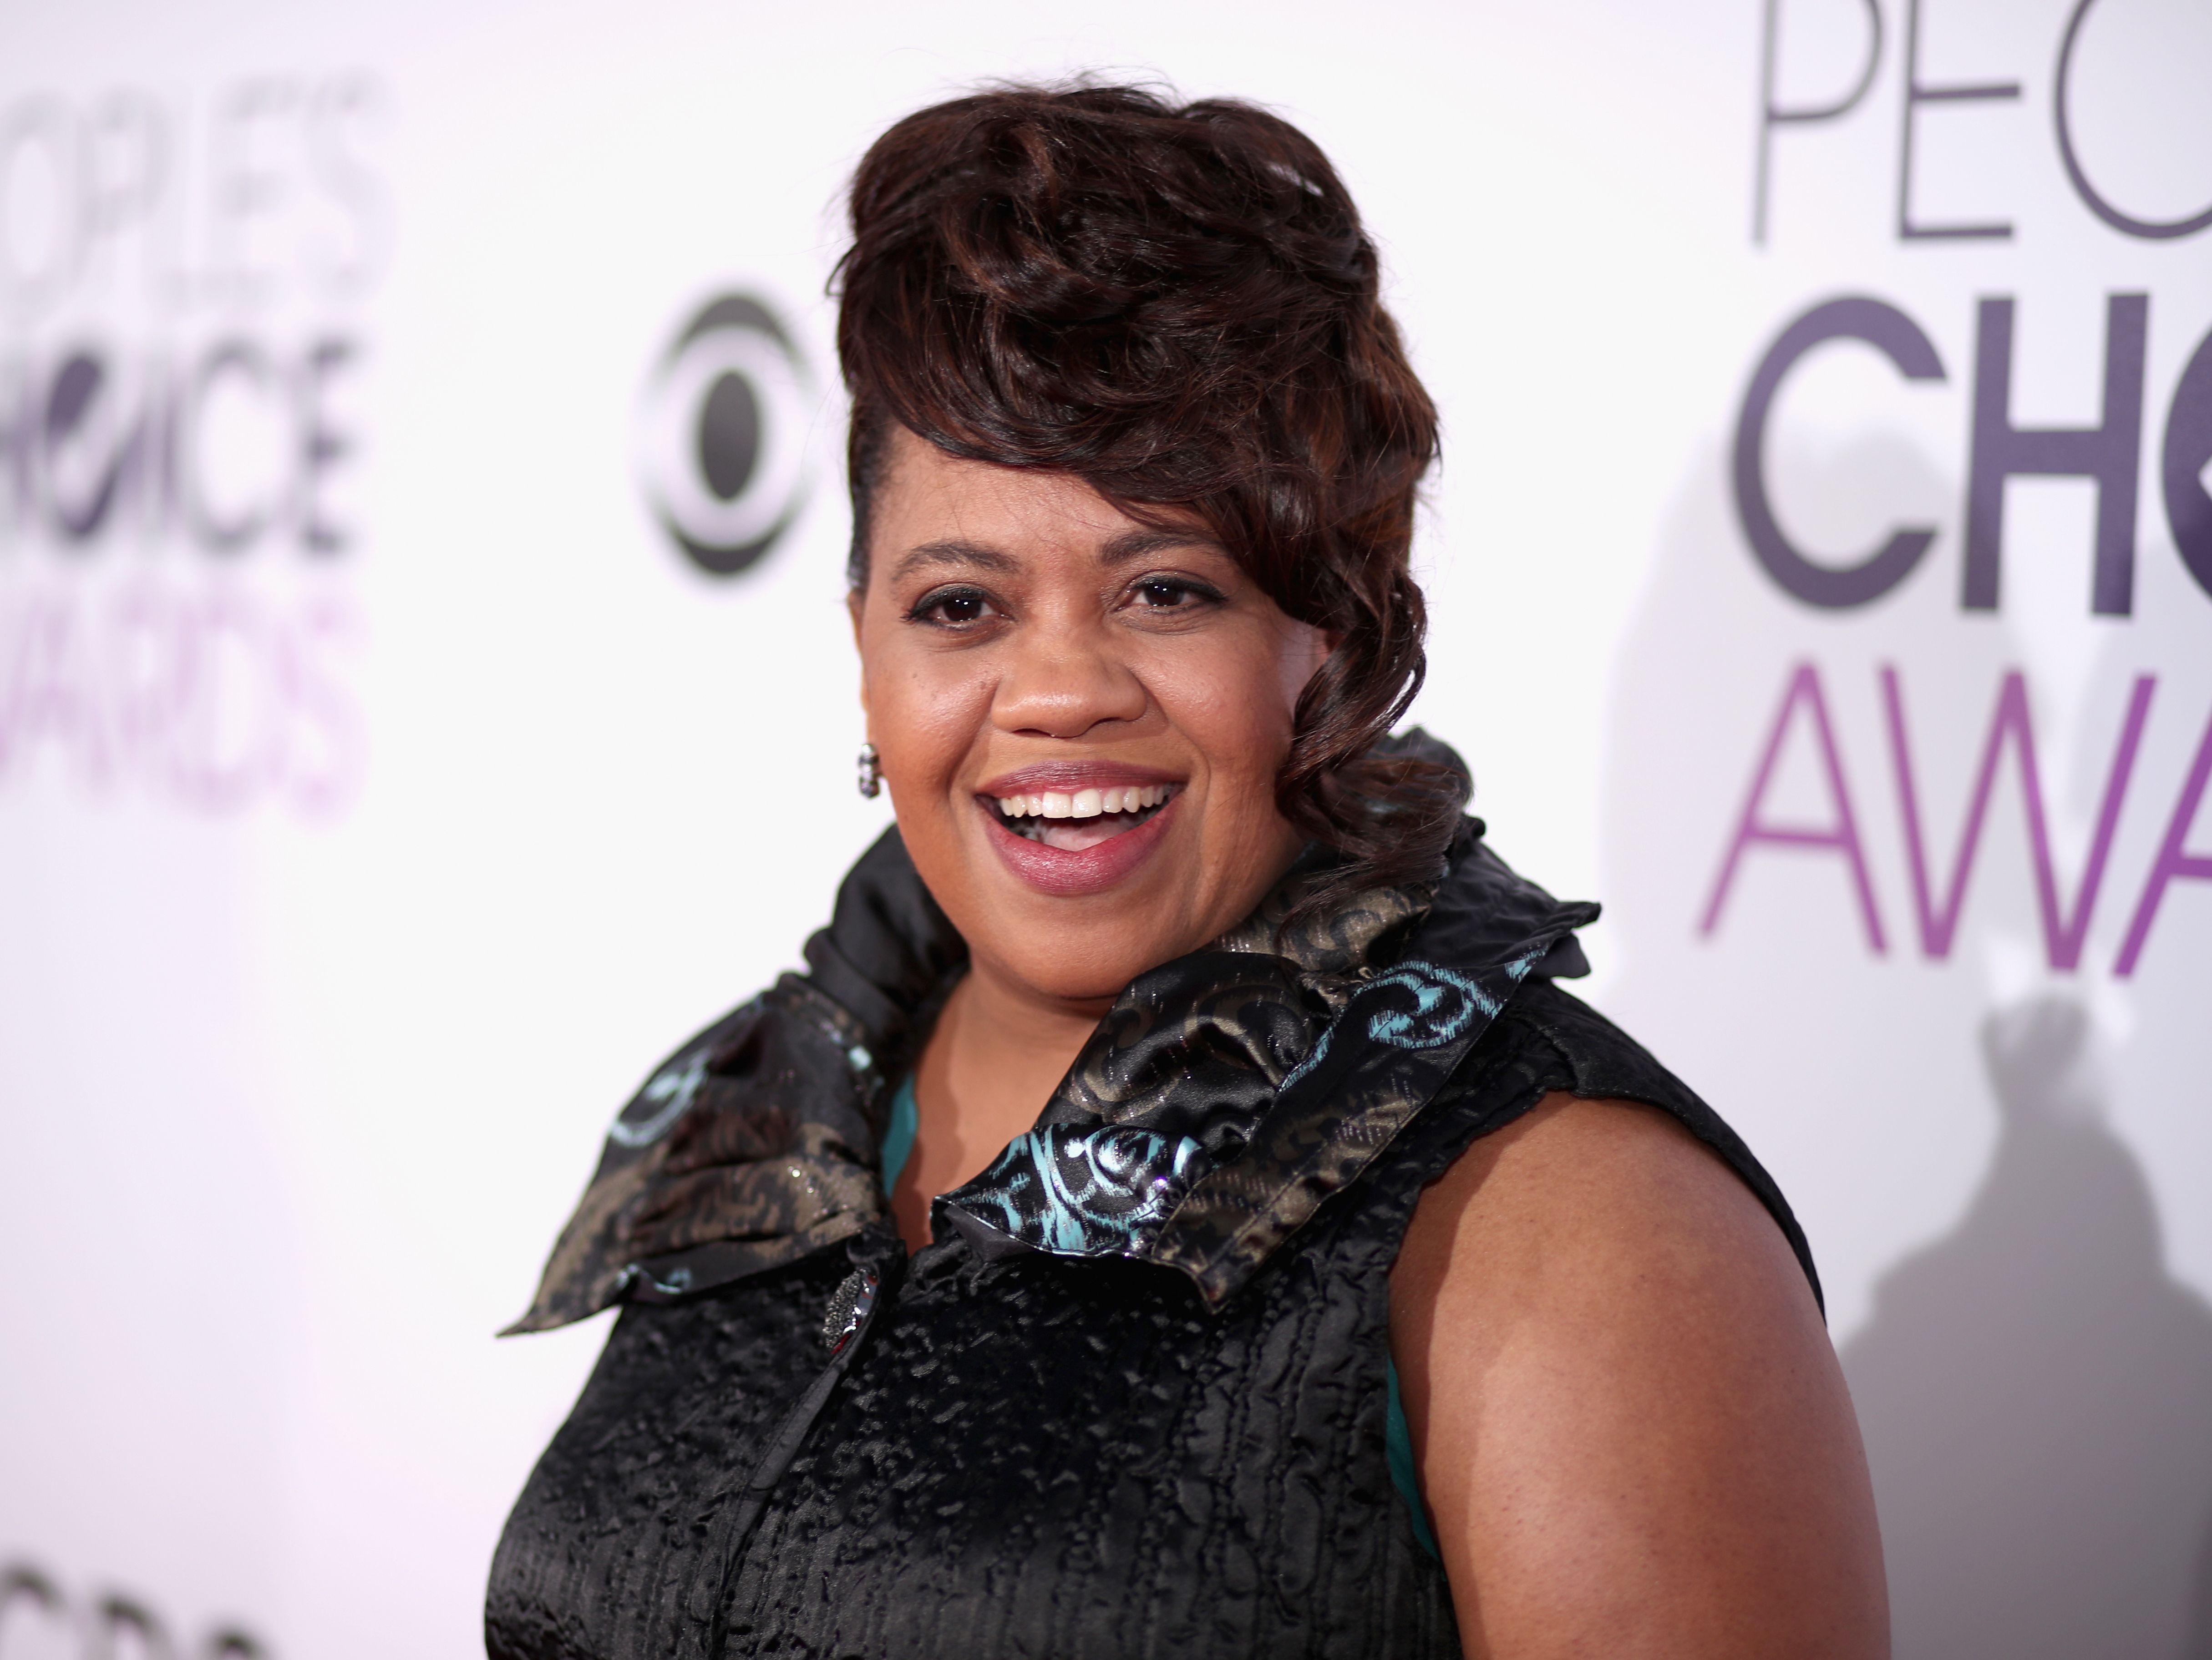 Chandra Wilson at the People's Choice Awards on January 18, 2017, in Los Angeles, California | Photo: Christopher Polk/Getty Images